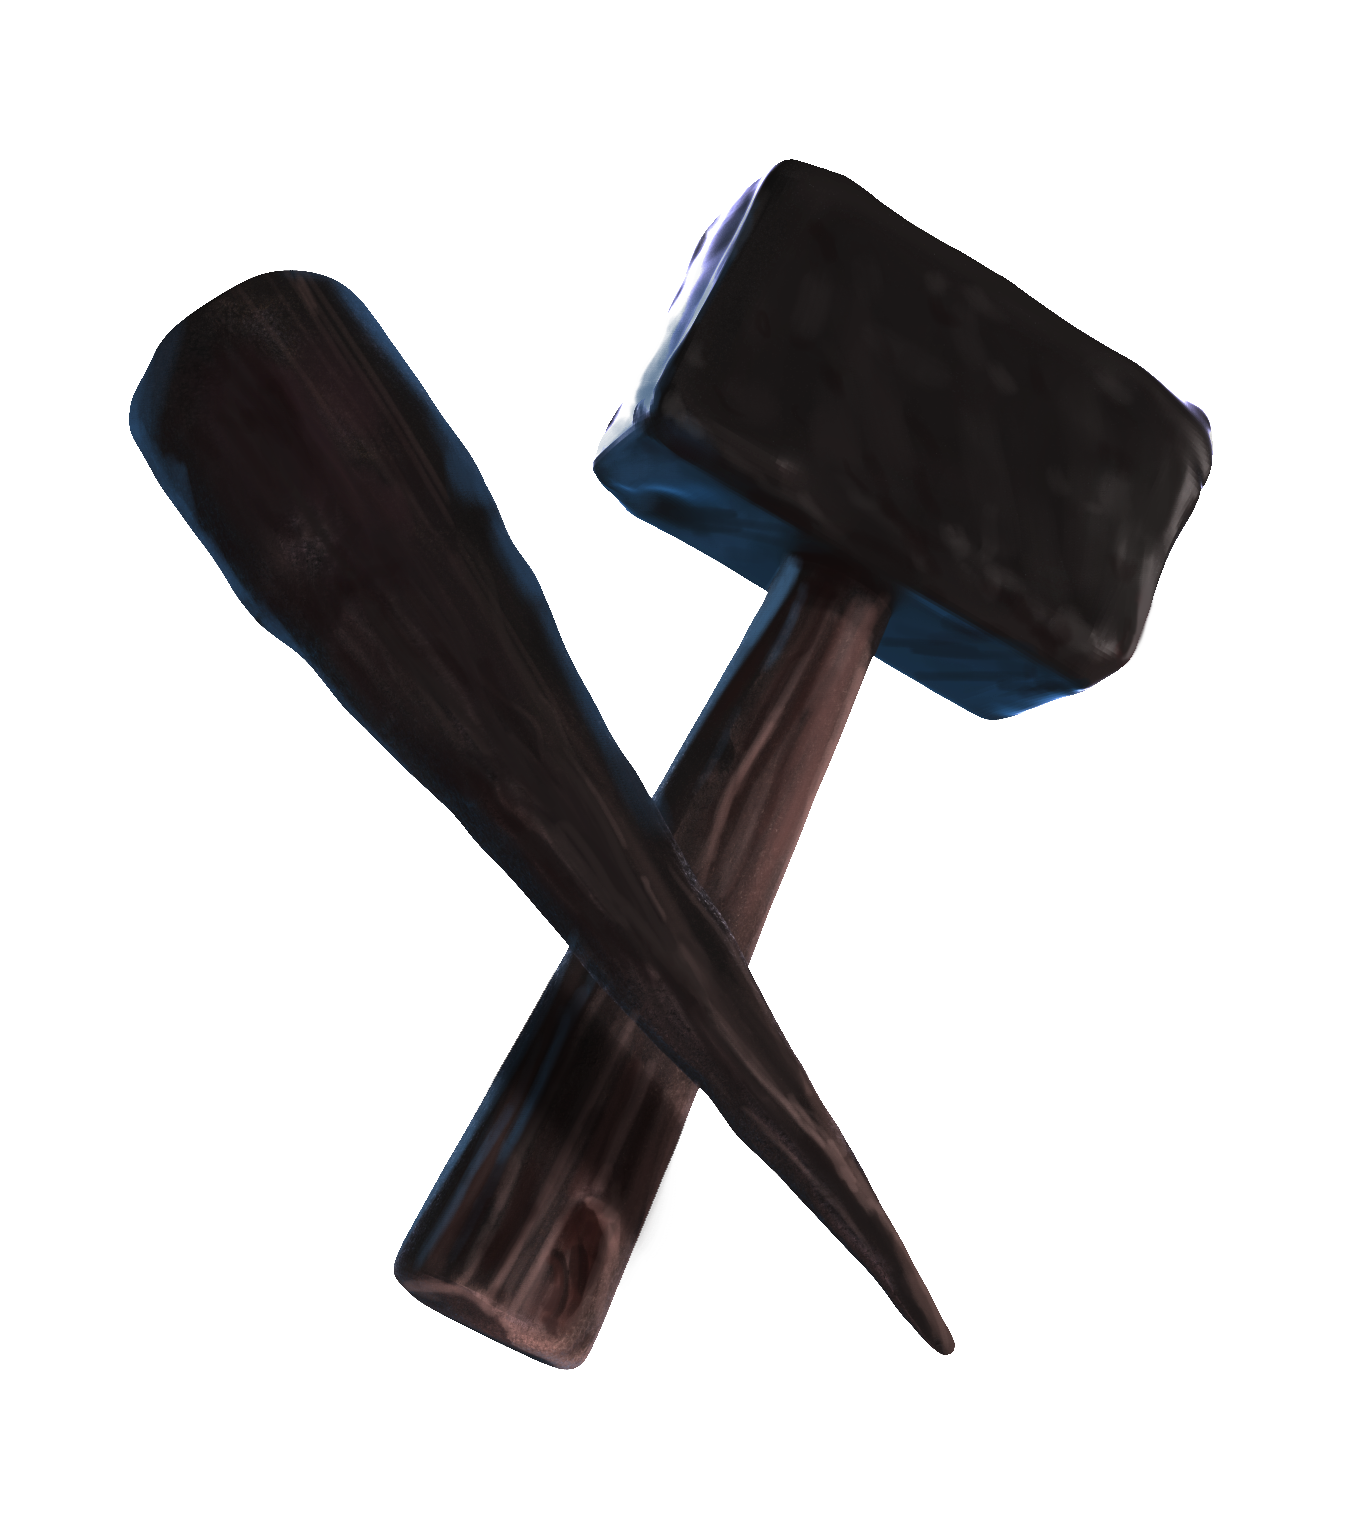 98_extra_stake_hammer_crossed_transparent_halloween.png thumbnail